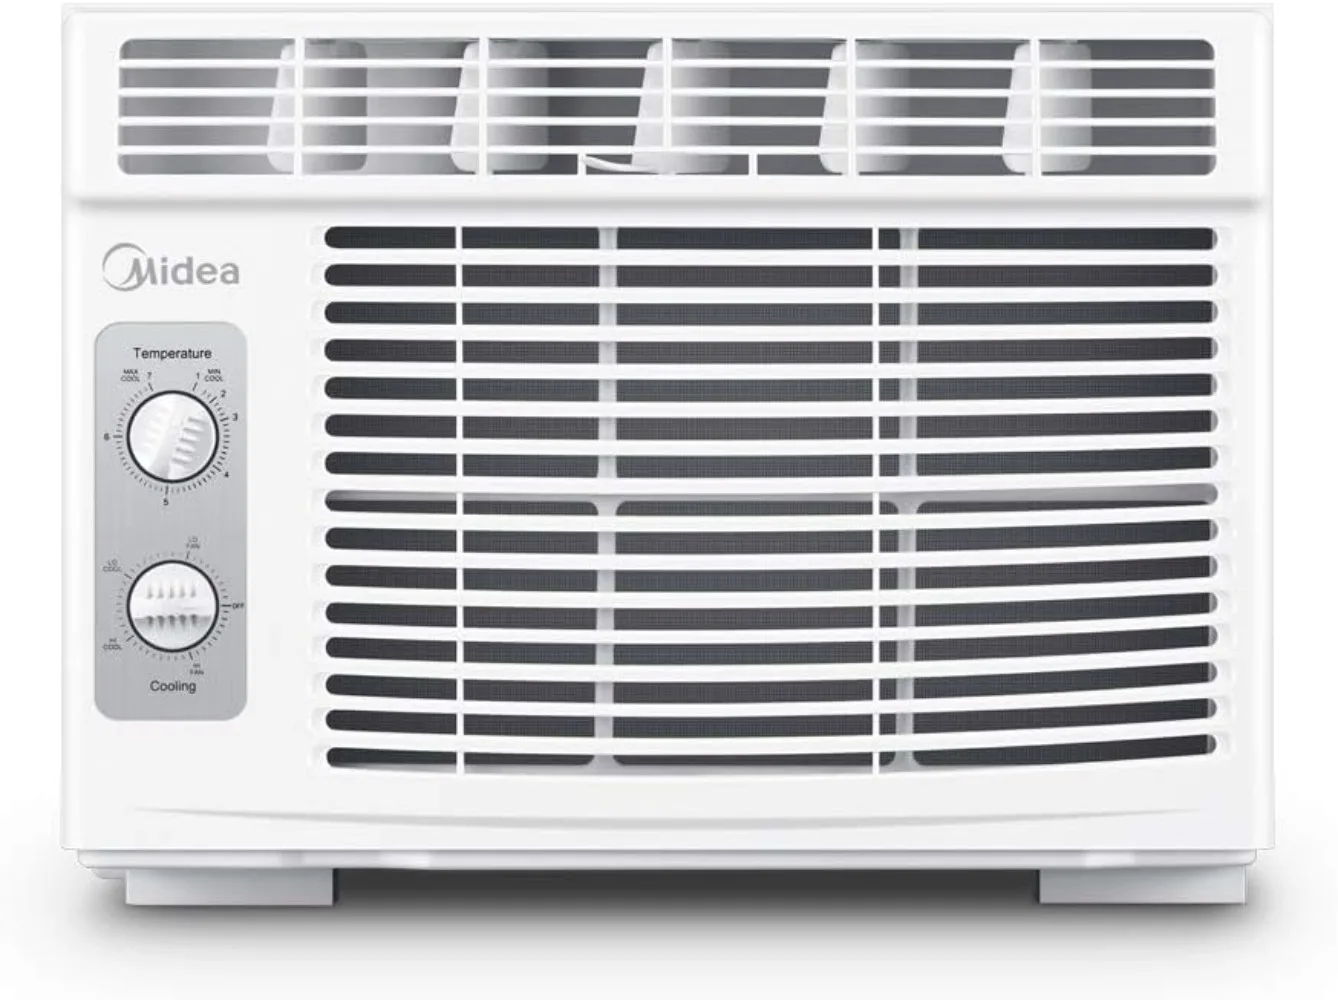 

5,000 BTU EasyCool Small Window Air Conditioner - Cool up to 150 Sq. Ft. with Easy-to-Use Mechanical Controls